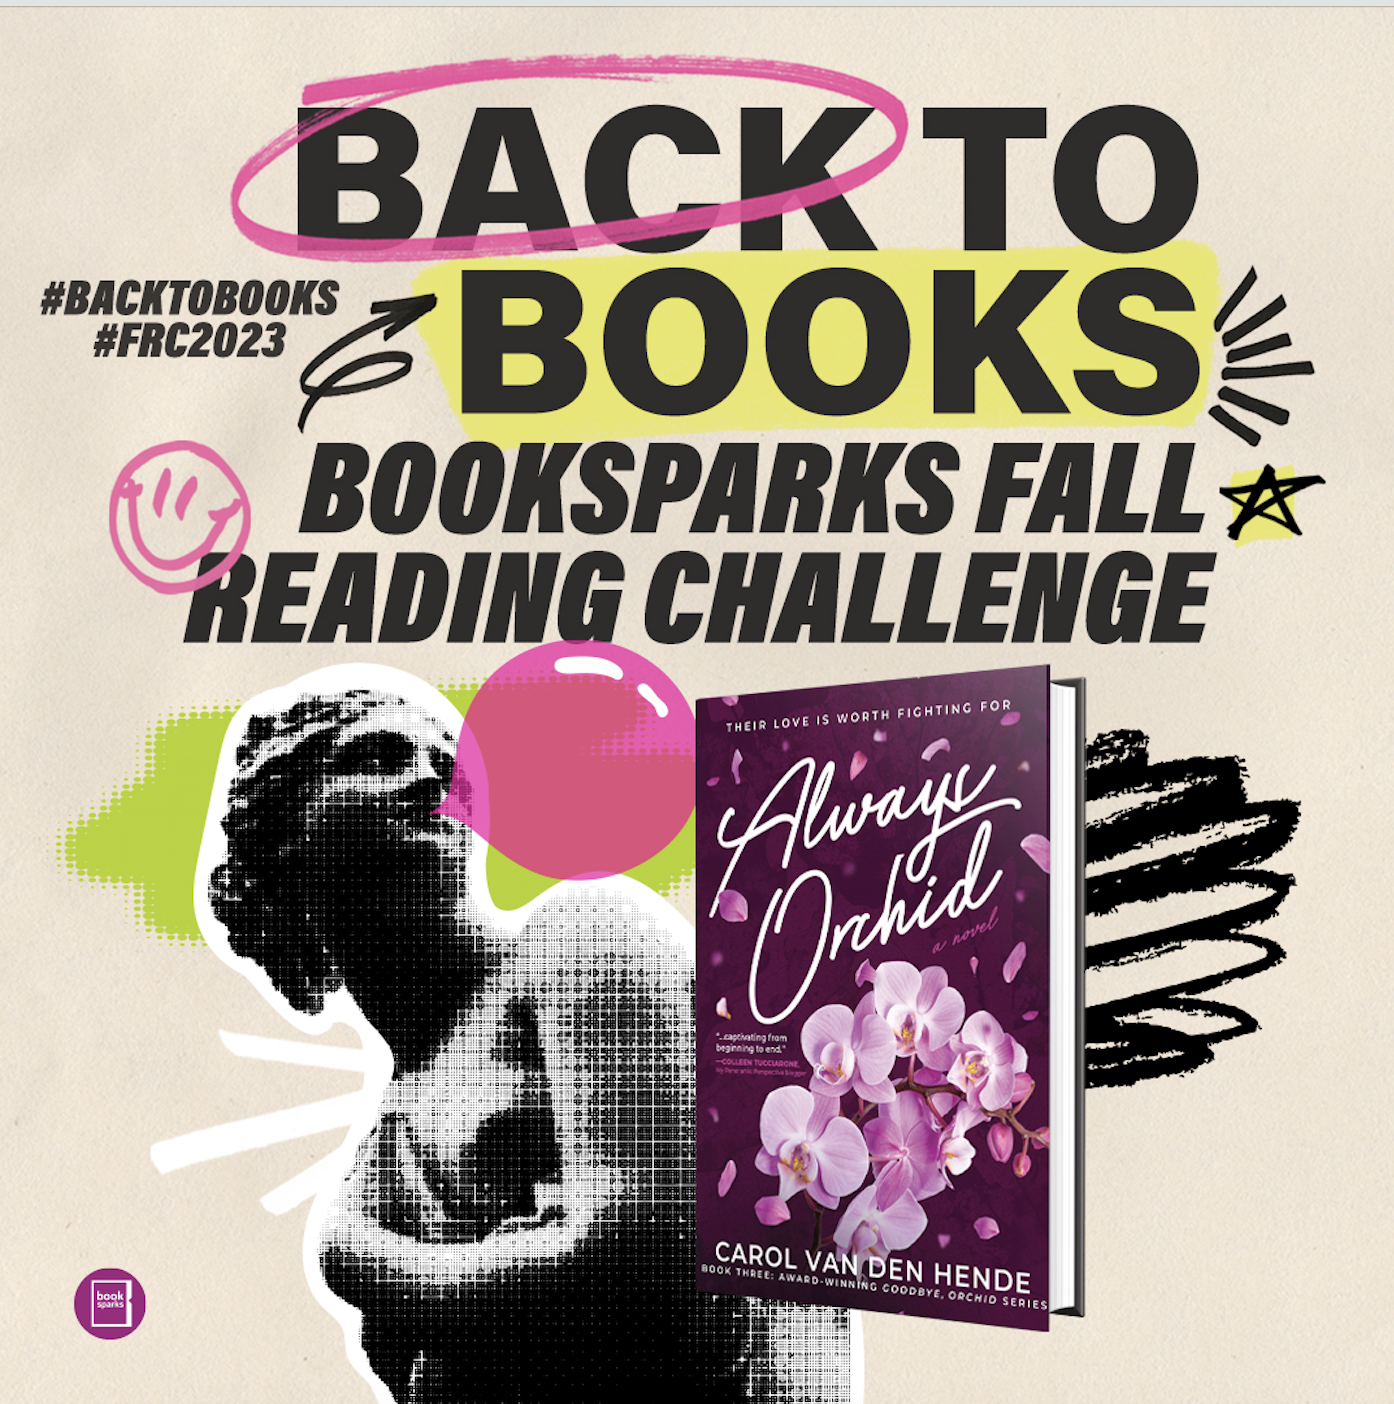 Back to Books Booksparks Fall Reading Challenge with Always Orchid book cover